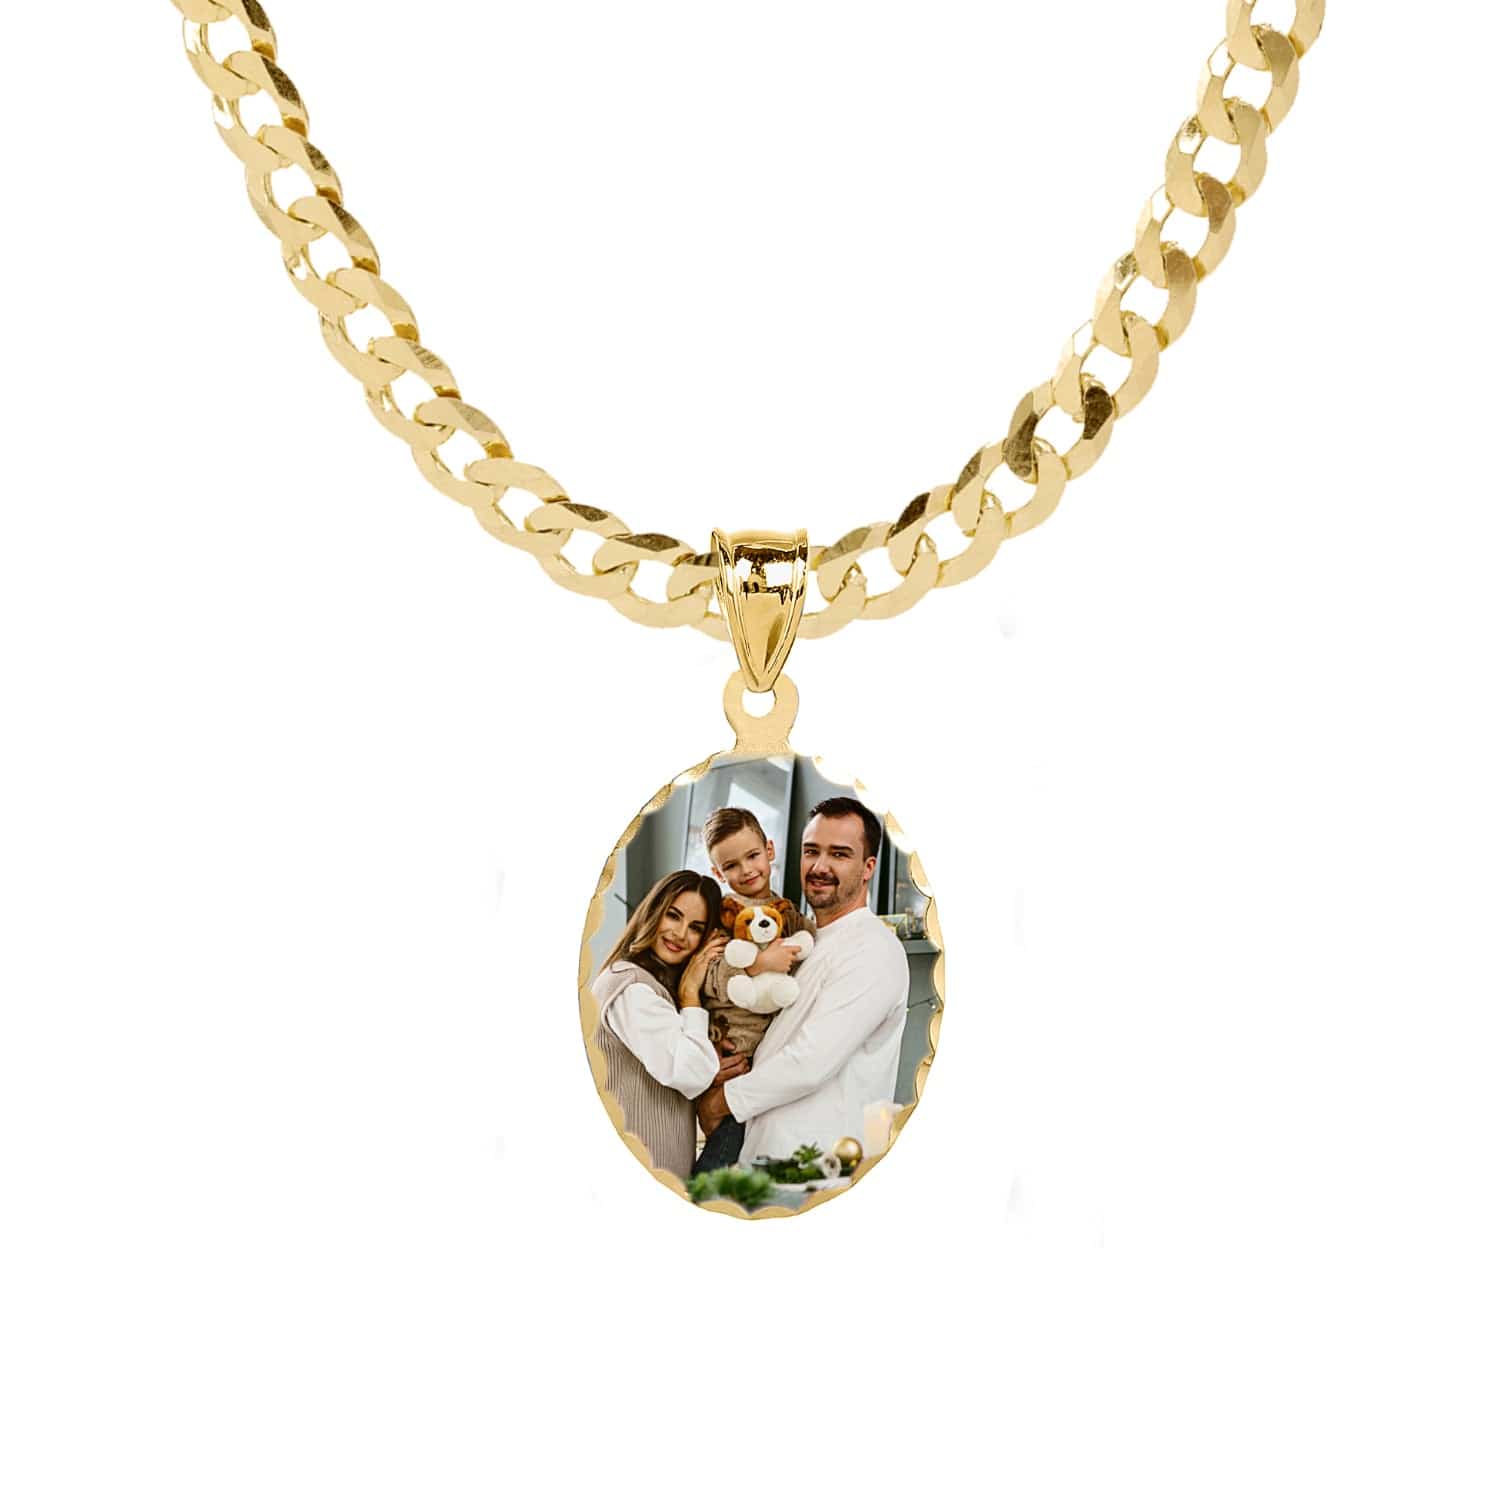 Gold Plated / Cuban Chain Copy of Oval Portrait Pendant with Diamond Cut Edges